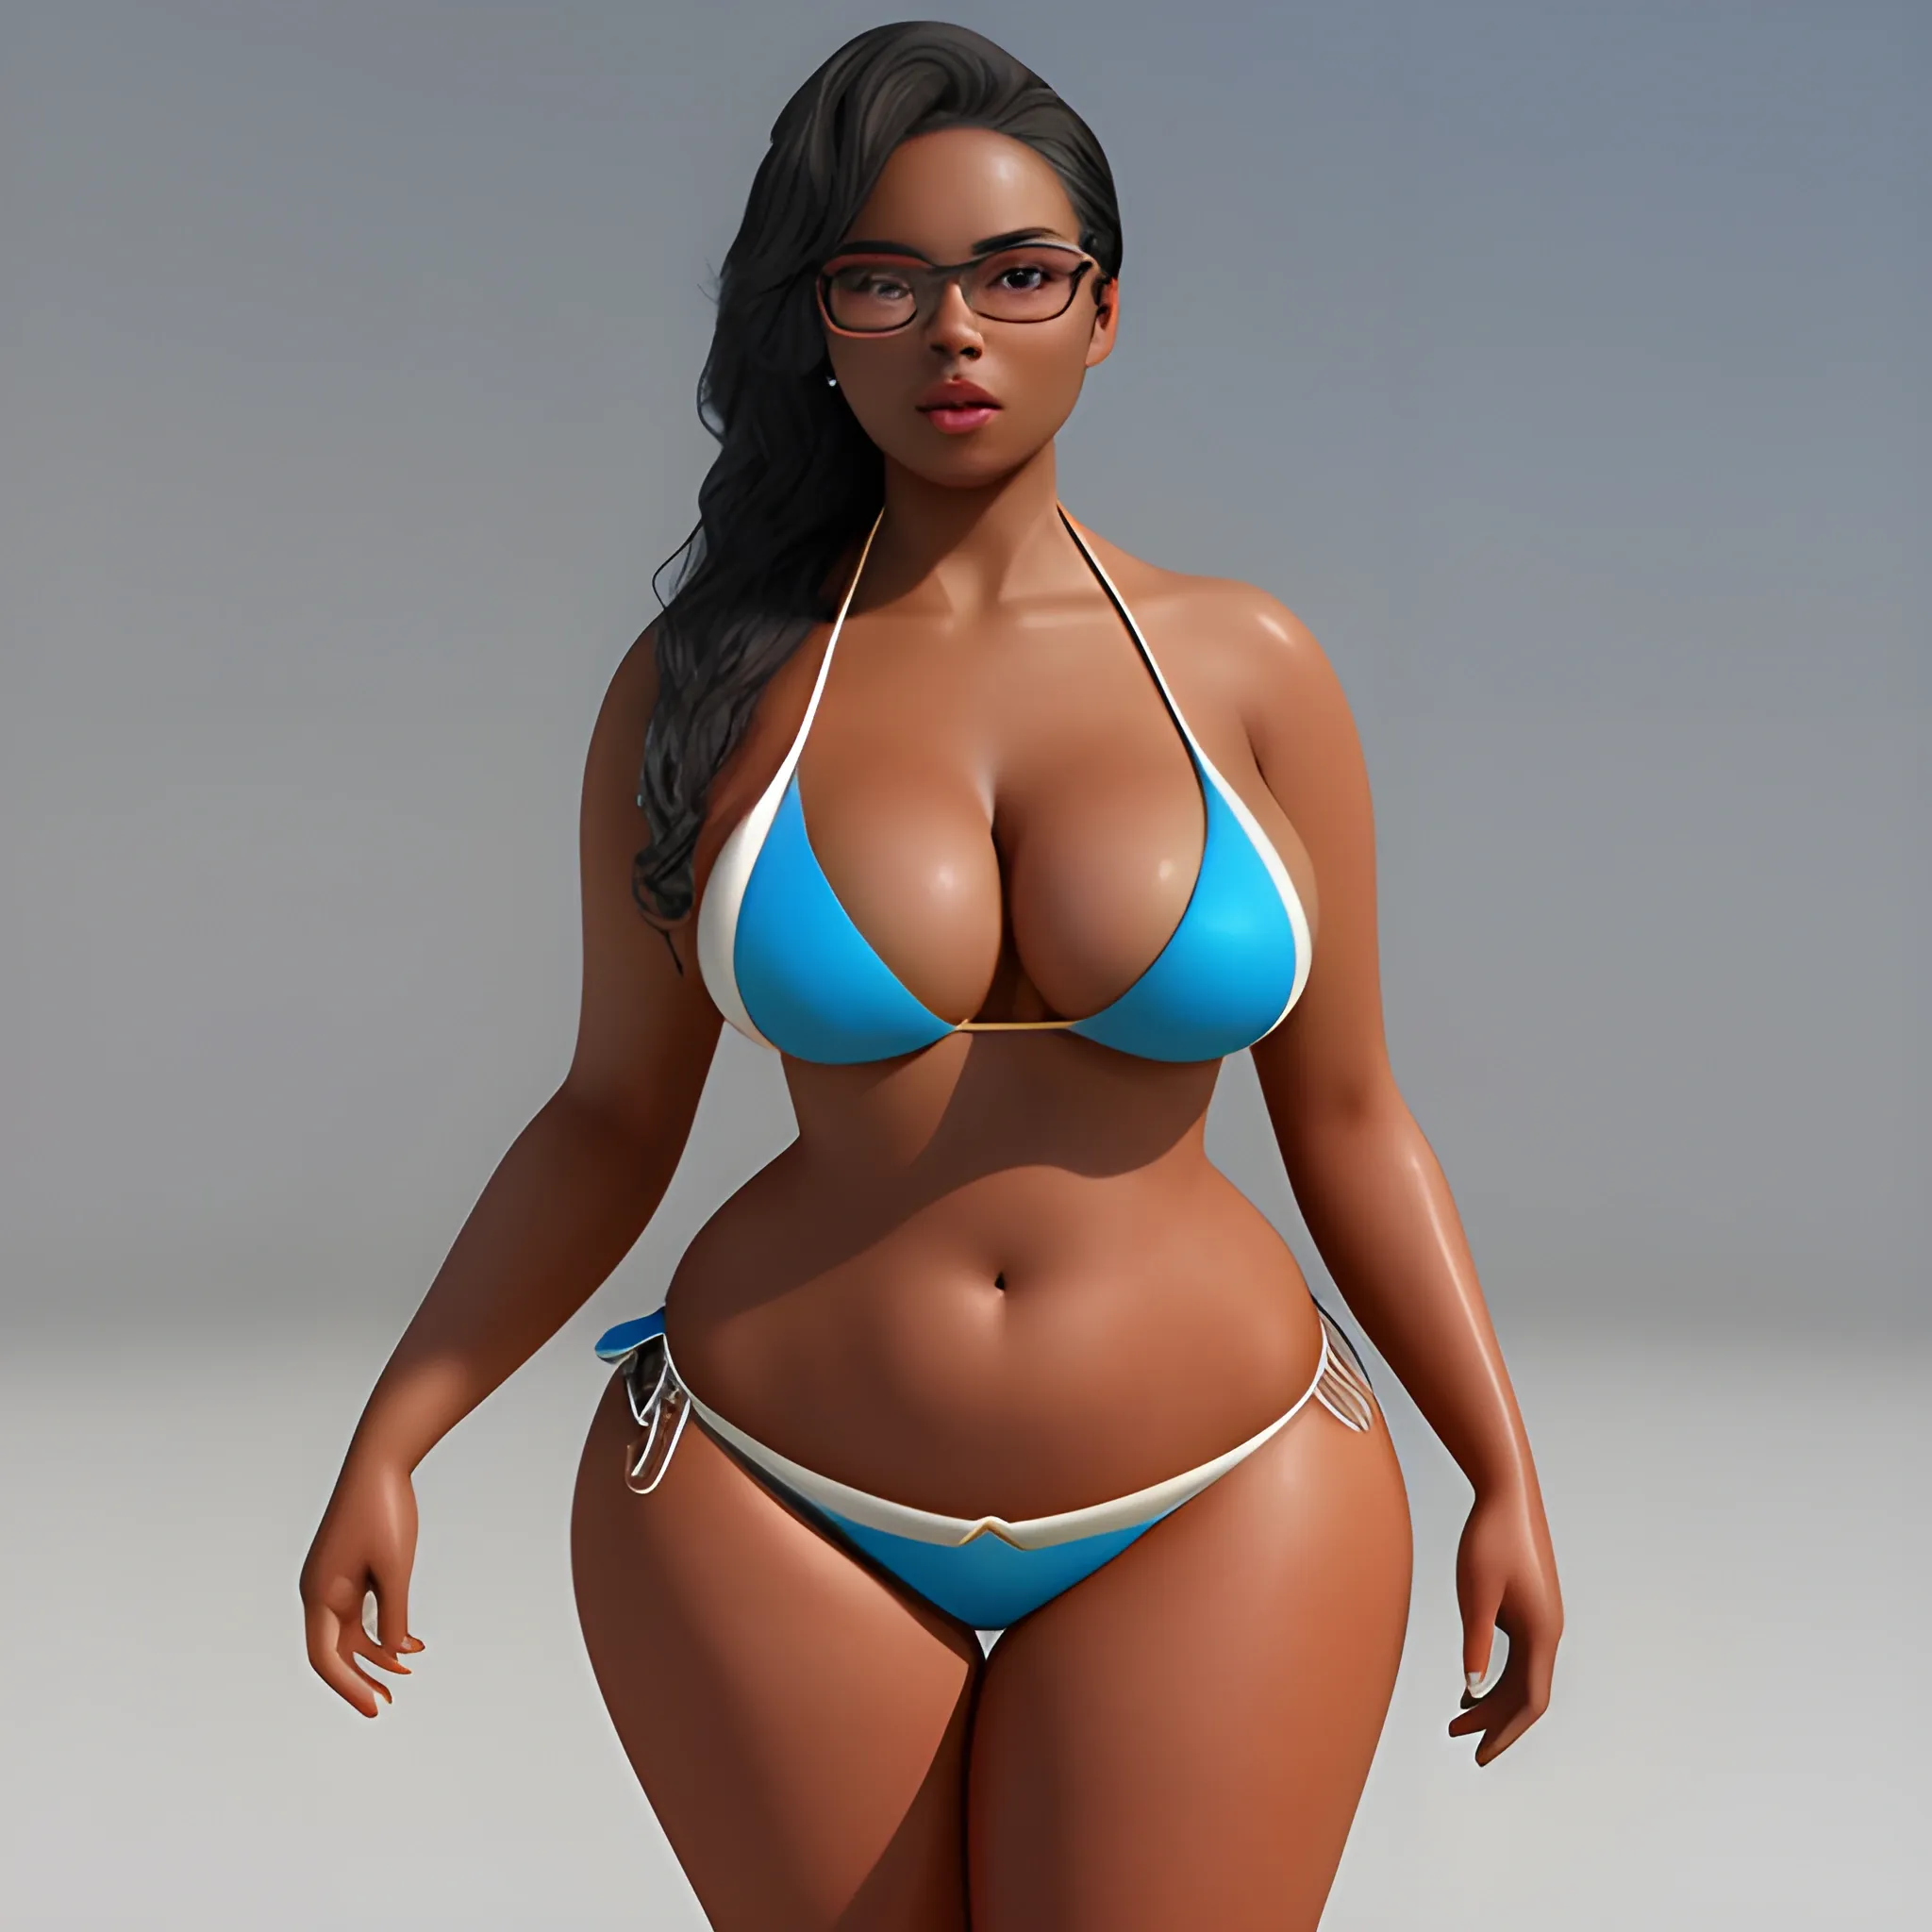 curvy woman with mixed skin in a luxury bikini standing up
, 3D